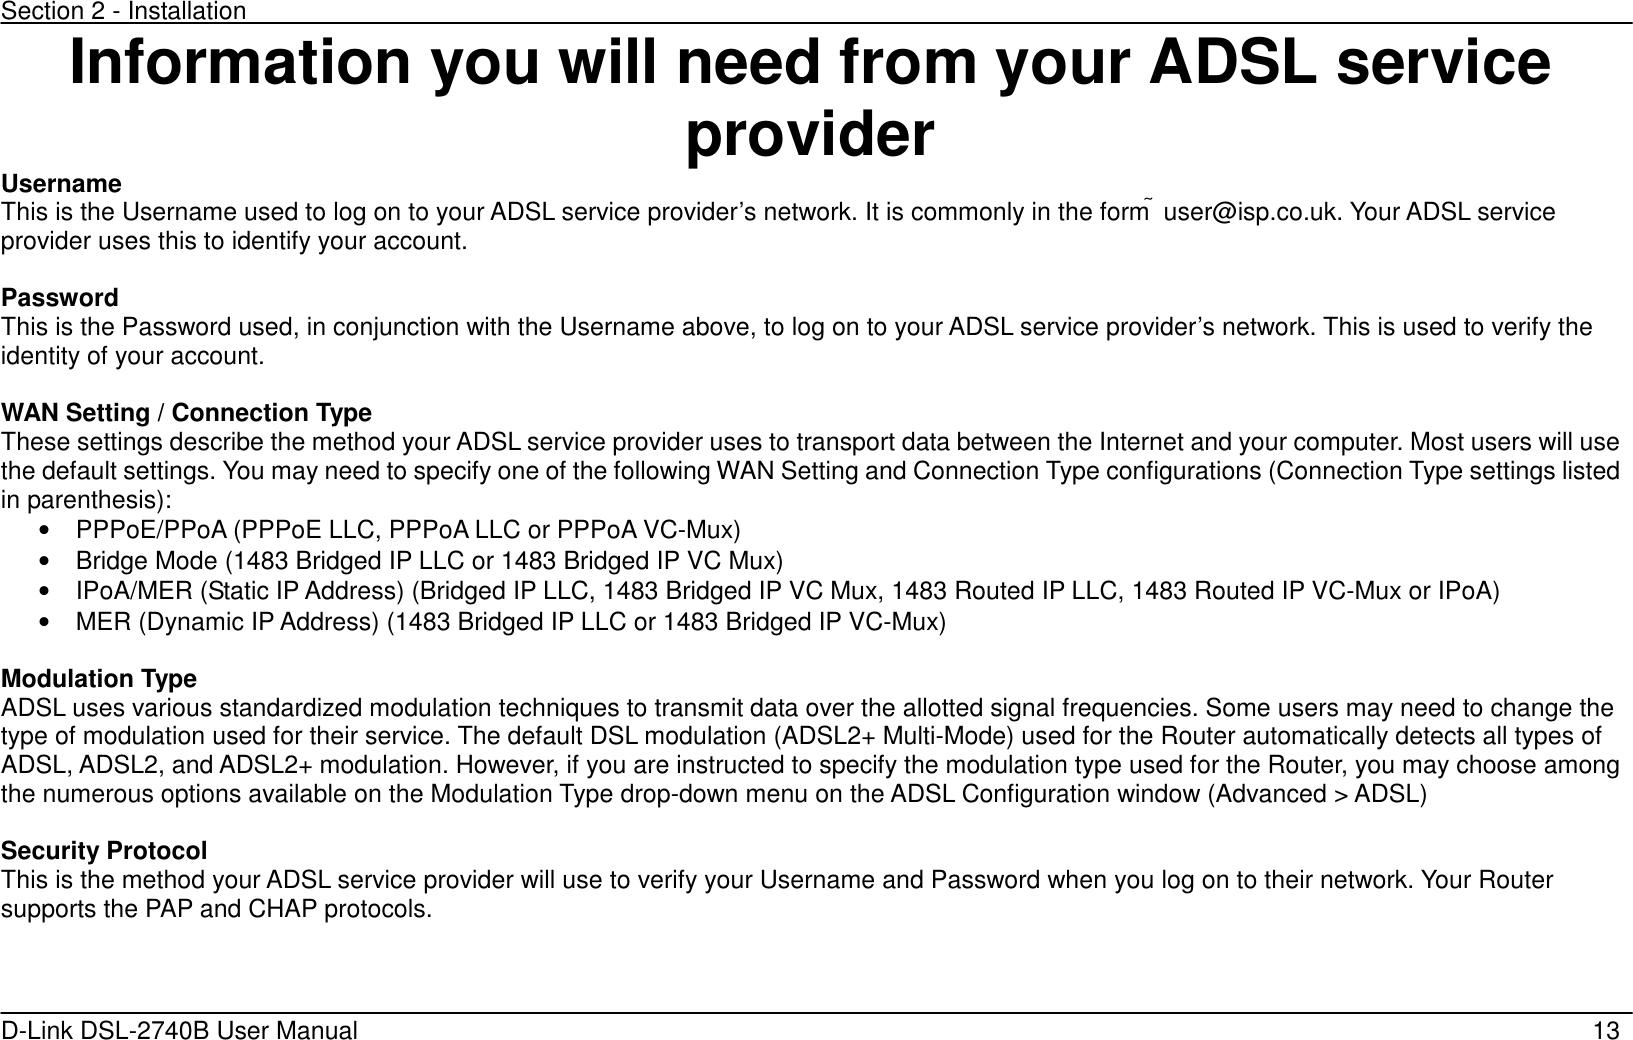 Section 2 - Installation   D-Link DSL-2740B User Manual                                                  13 Information you will need from your ADSL service provider Username This is the Username used to log on to your ADSL service provider’s network. It is commonly in the form  user@isp.co.uk. Your ADSL service provider uses this to identify your account.  Password This is the Password used, in conjunction with the Username above, to log on to your ADSL service provider’s network. This is used to verify the identity of your account.  WAN Setting / Connection Type These settings describe the method your ADSL service provider uses to transport data between the Internet and your computer. Most users will use the default settings. You may need to specify one of the following WAN Setting and Connection Type configurations (Connection Type settings listed in parenthesis):   •  PPPoE/PPoA (PPPoE LLC, PPPoA LLC or PPPoA VC-Mux) •  Bridge Mode (1483 Bridged IP LLC or 1483 Bridged IP VC Mux) •  IPoA/MER (Static IP Address) (Bridged IP LLC, 1483 Bridged IP VC Mux, 1483 Routed IP LLC, 1483 Routed IP VC-Mux or IPoA) •  MER (Dynamic IP Address) (1483 Bridged IP LLC or 1483 Bridged IP VC-Mux)      Modulation Type ADSL uses various standardized modulation techniques to transmit data over the allotted signal frequencies. Some users may need to change the type of modulation used for their service. The default DSL modulation (ADSL2+ Multi-Mode) used for the Router automatically detects all types of ADSL, ADSL2, and ADSL2+ modulation. However, if you are instructed to specify the modulation type used for the Router, you may choose among the numerous options available on the Modulation Type drop-down menu on the ADSL Configuration window (Advanced &gt; ADSL)  Security Protocol This is the method your ADSL service provider will use to verify your Username and Password when you log on to their network. Your Router supports the PAP and CHAP protocols.    